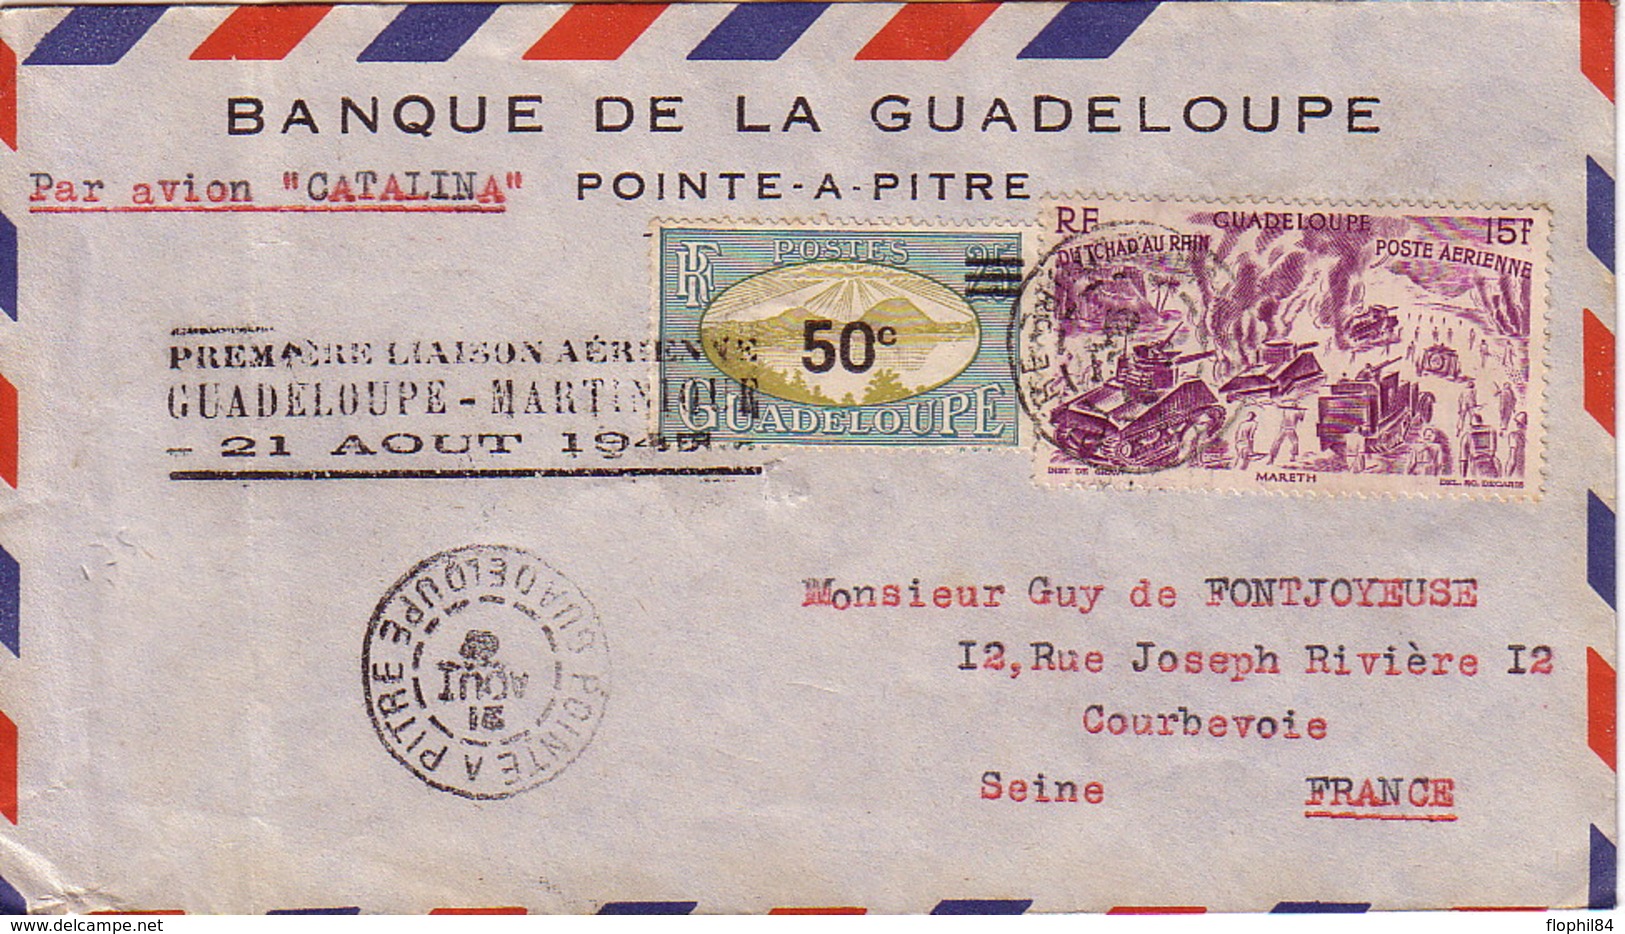 GUADELOUPE - POINTE A PITRE - 1er LIAISON AERIENNE GUADELOUPE-MARTINIQUE - 21 AOUT 1947. - Covers & Documents